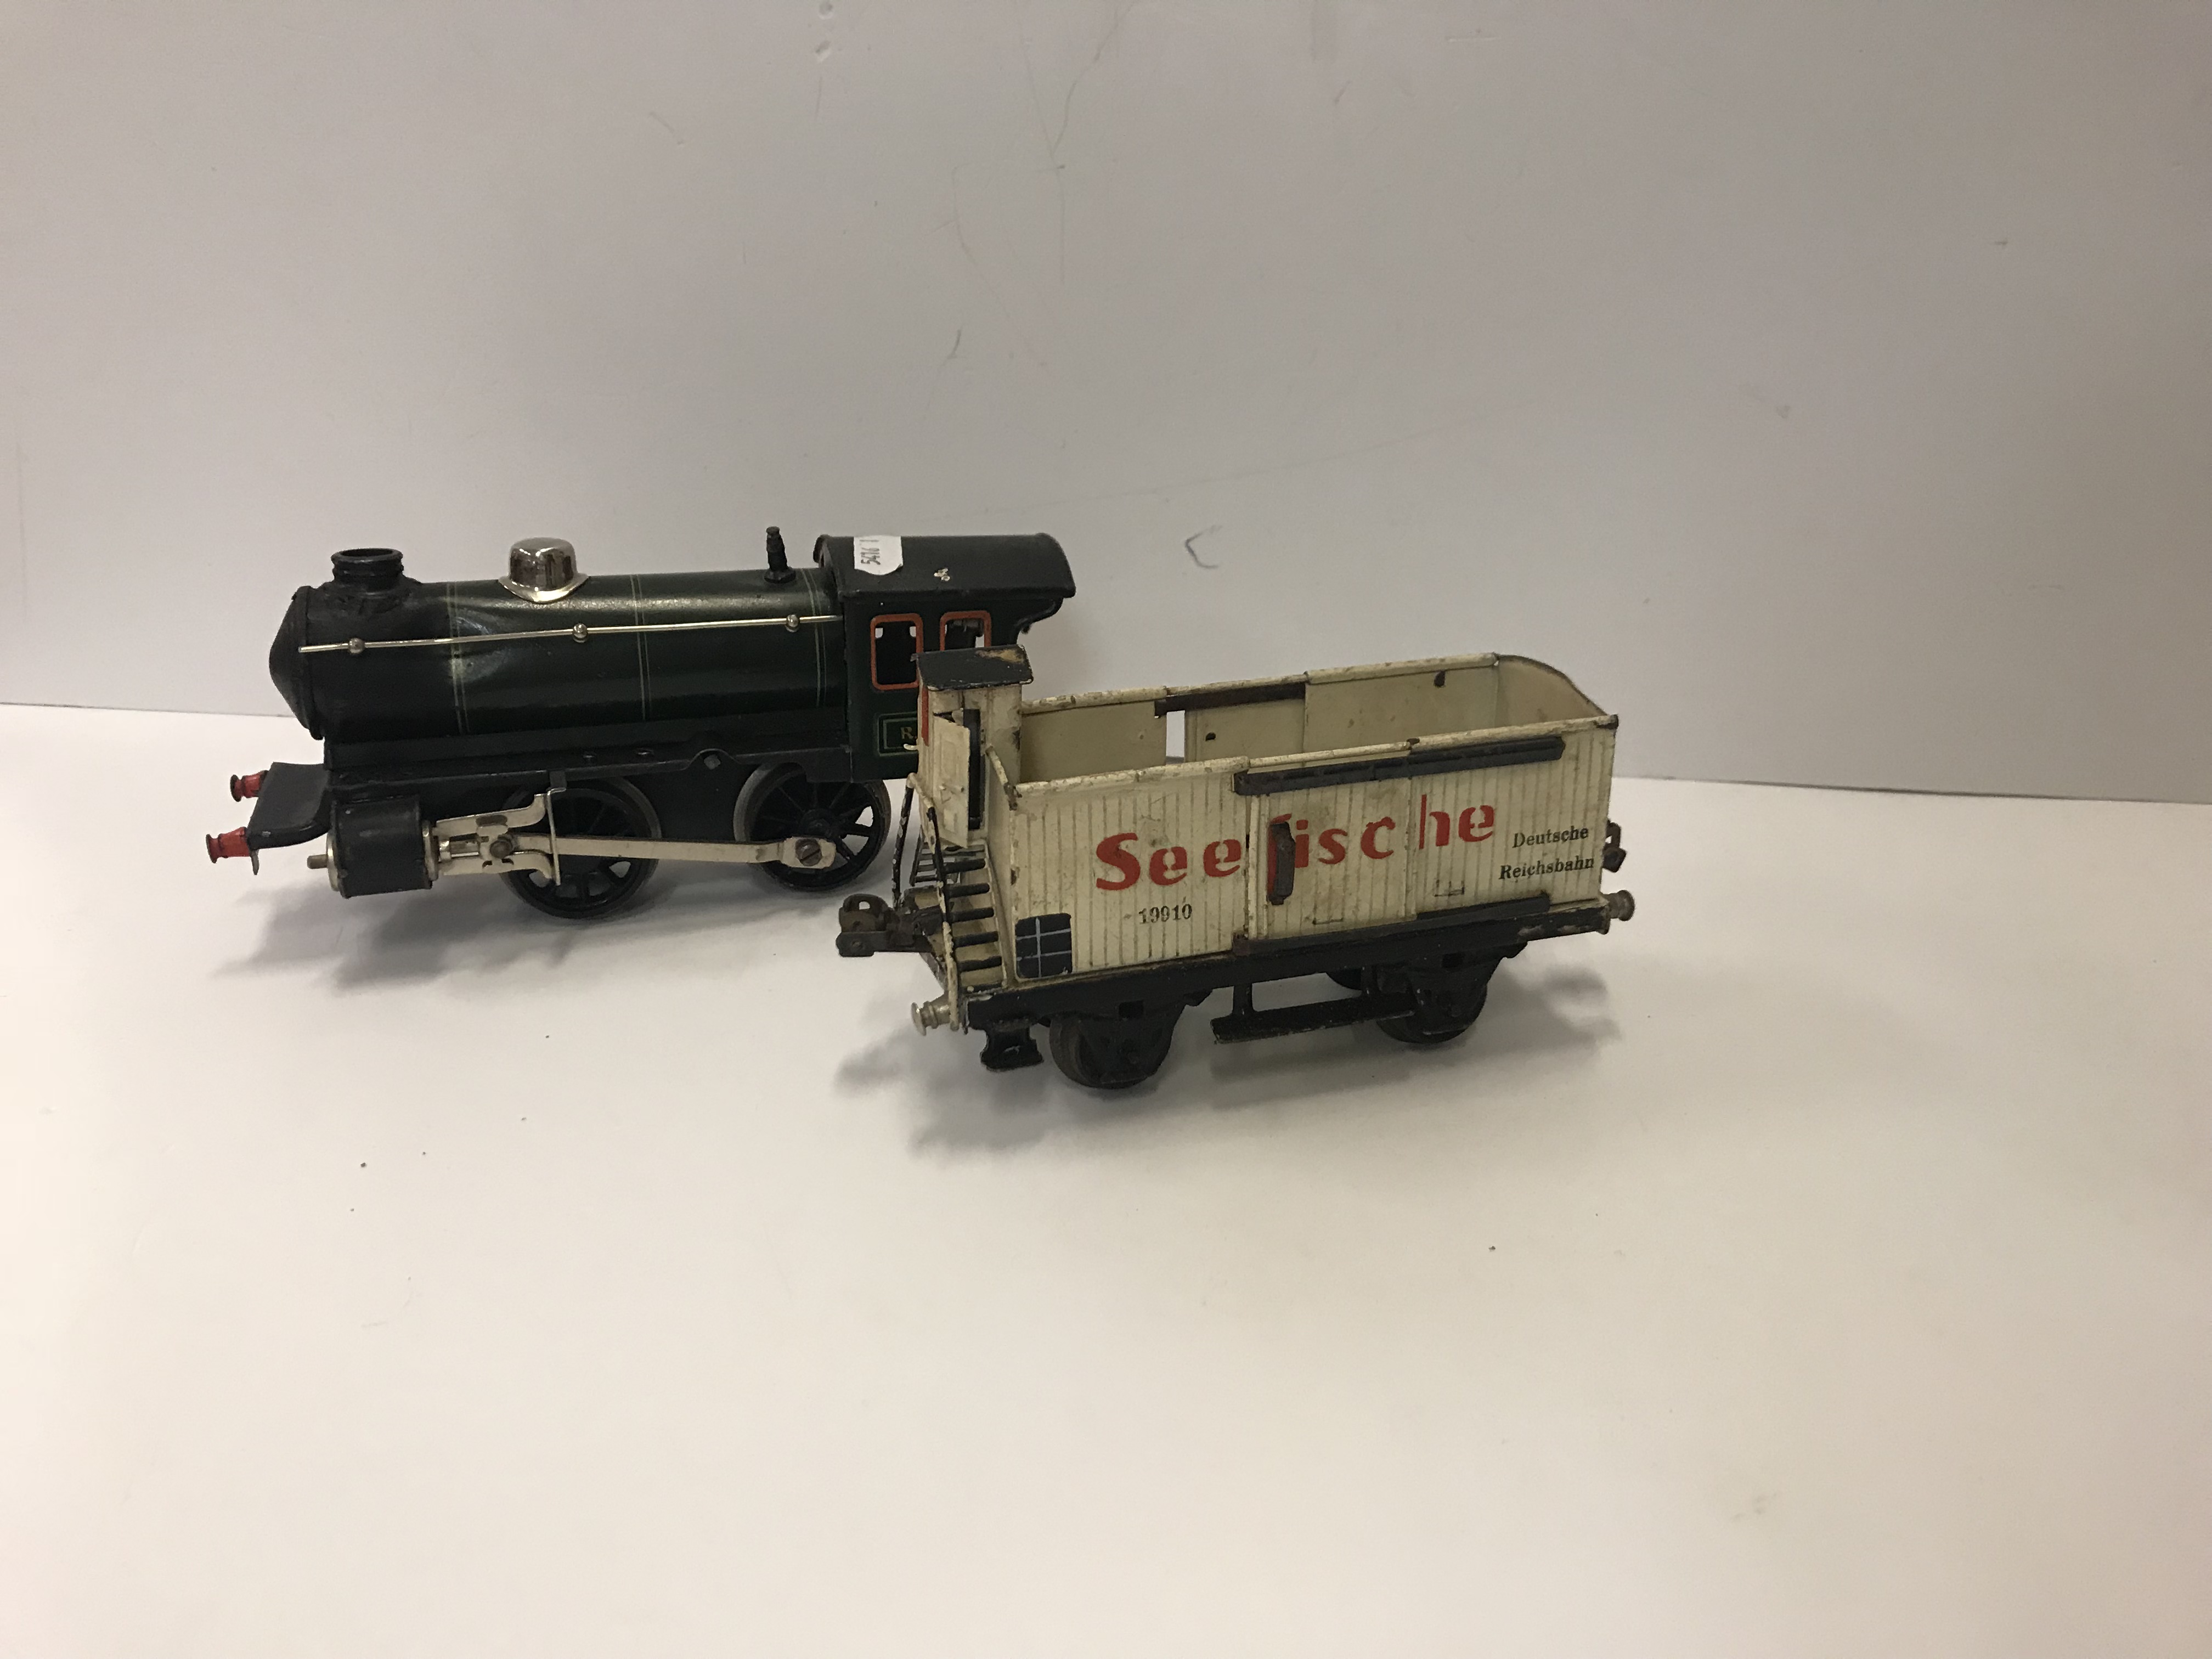 A Marklin 0-40- tank loco, wagon, grinder and fly wheel, - Image 2 of 2